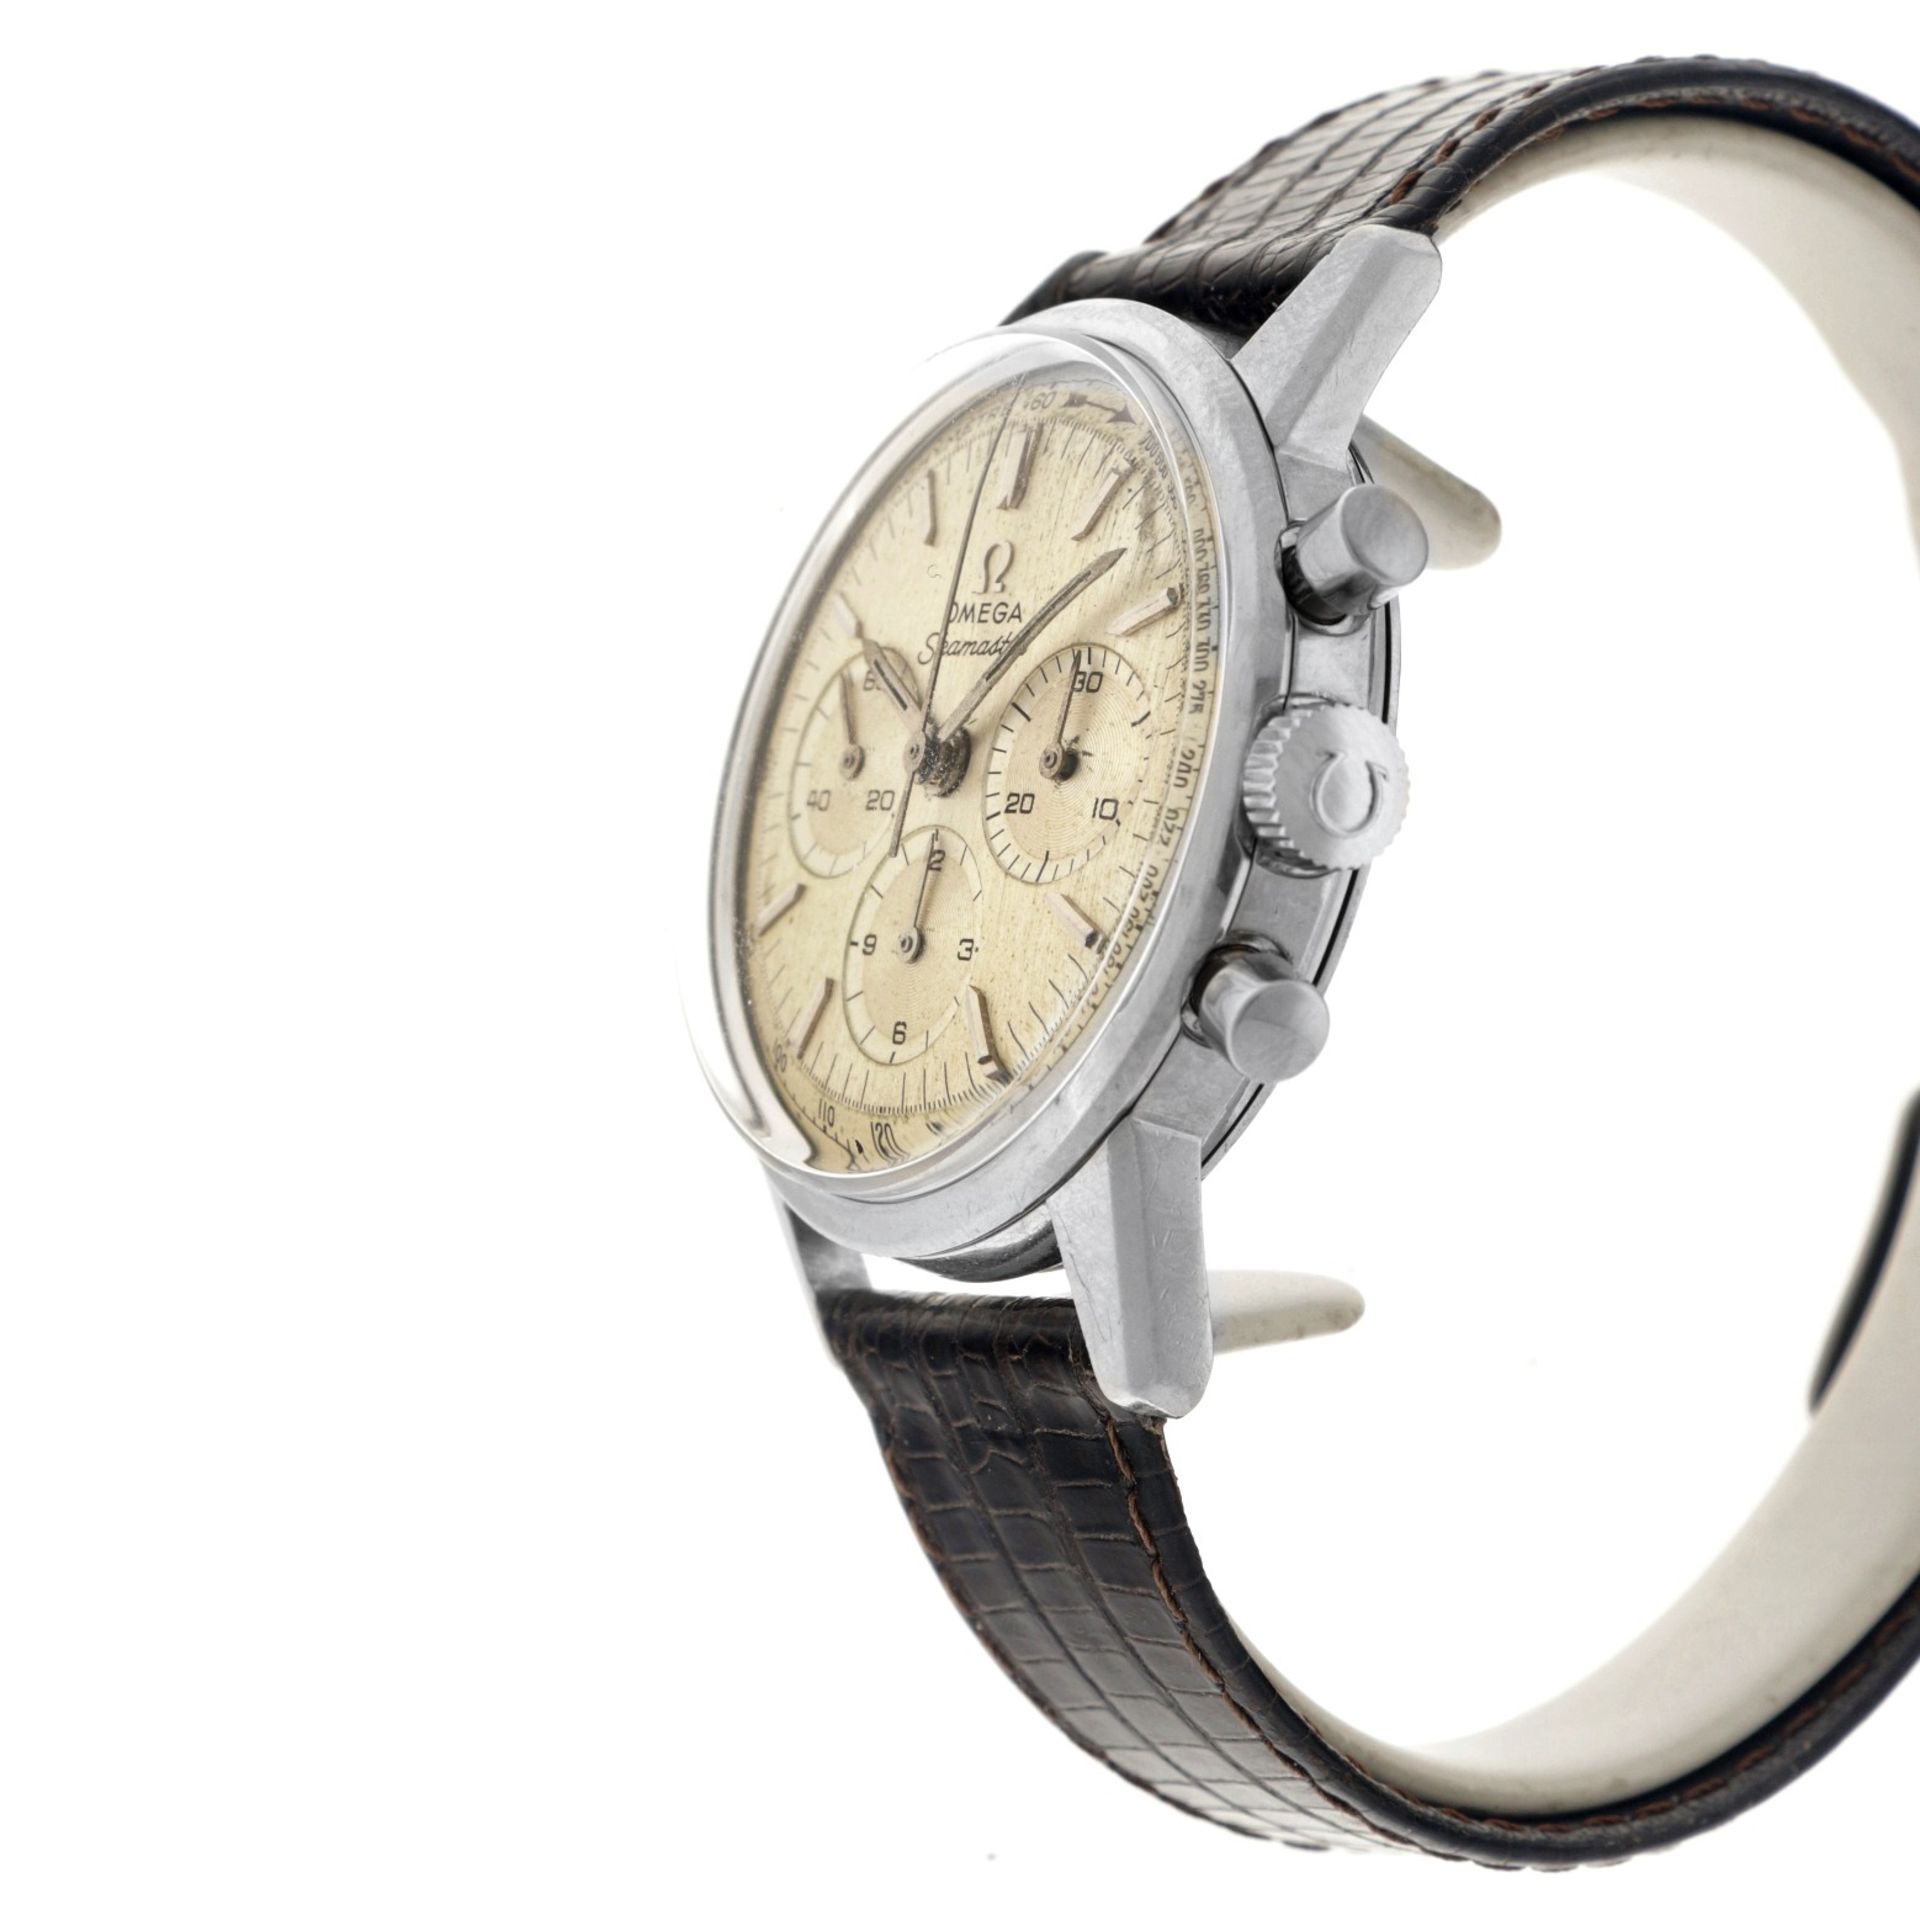 Omega Seamaster Chronograph 105.001 - Cal. 321 - Men's watch - approx. 1963. - Image 5 of 6